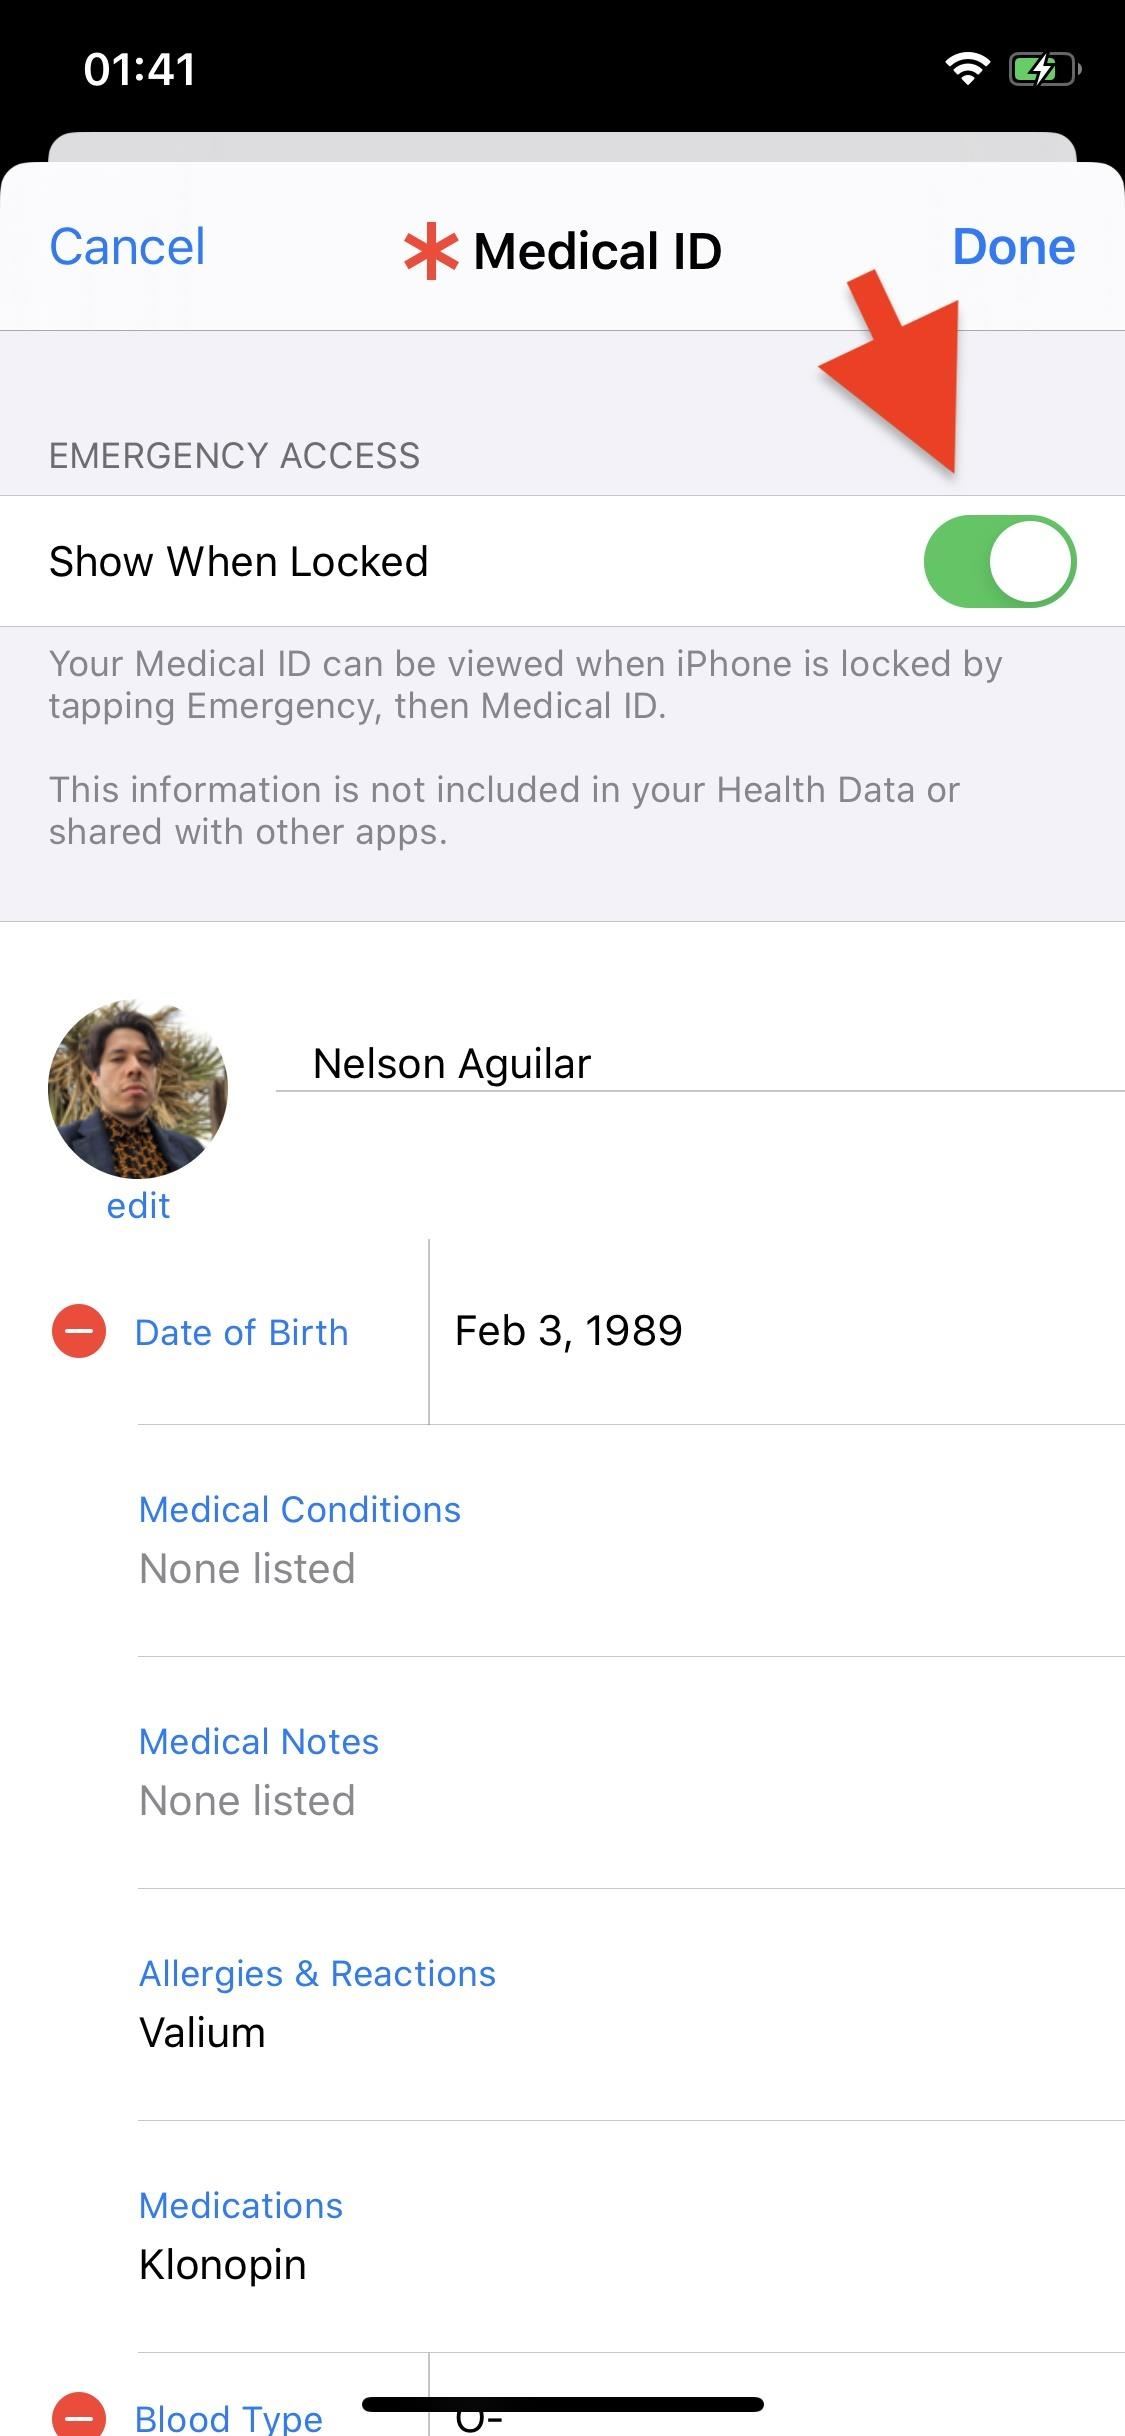 How to Add an Emergency Medical Card to Your iPhone's Lock Screen with Important Health Information for First Responders